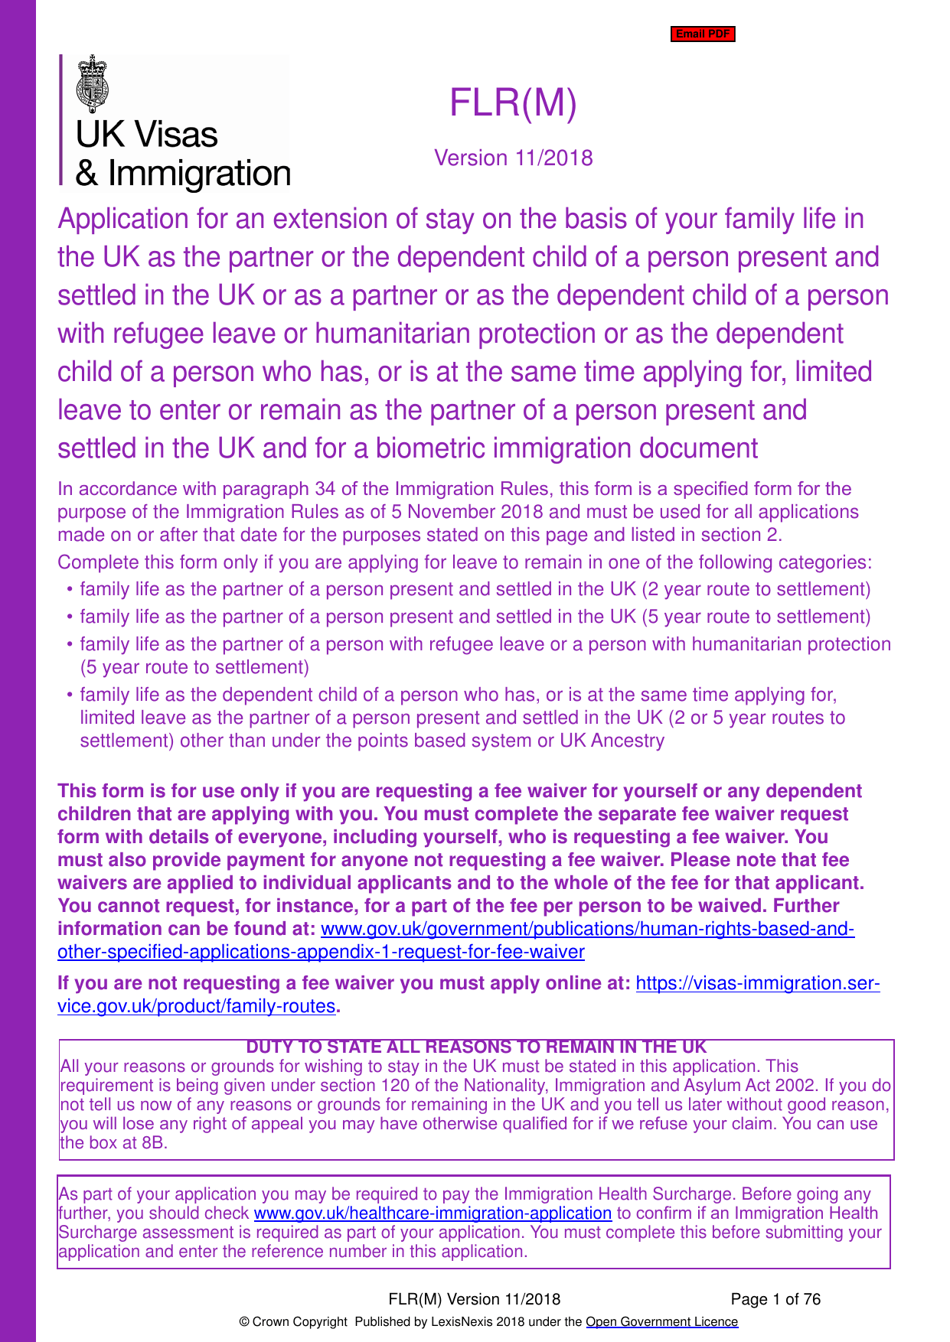 Form FLR(M) Extend Your Stay in the UK as a Partner or Dependent Child - United Kingdom, Page 1